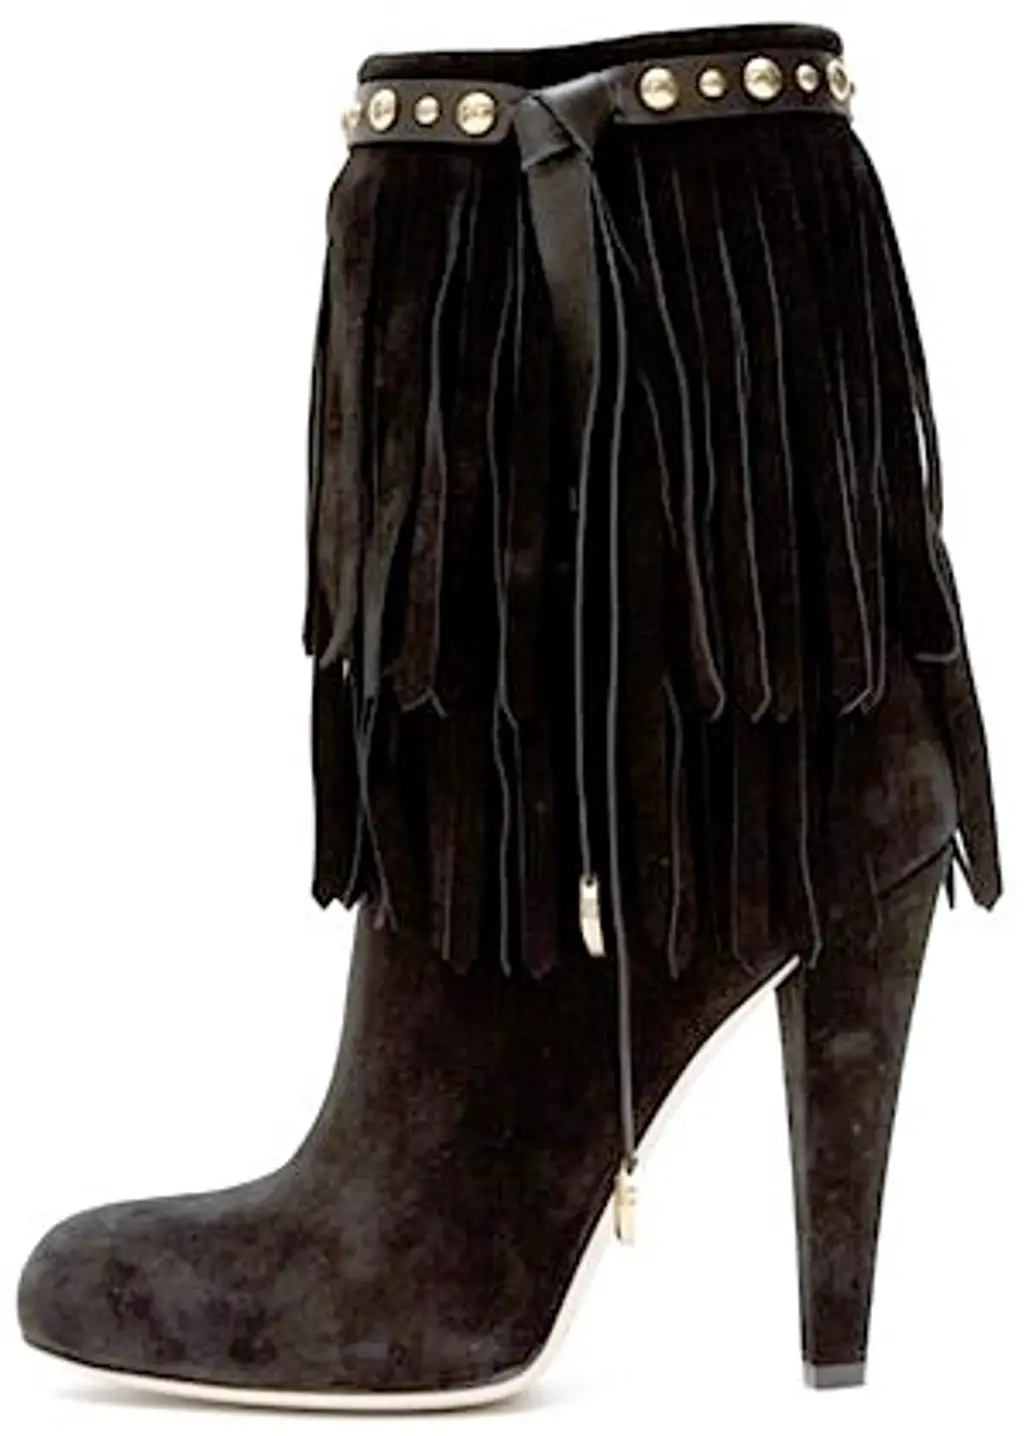 Suede Boots with Fringe and Stud Detail by Gucci